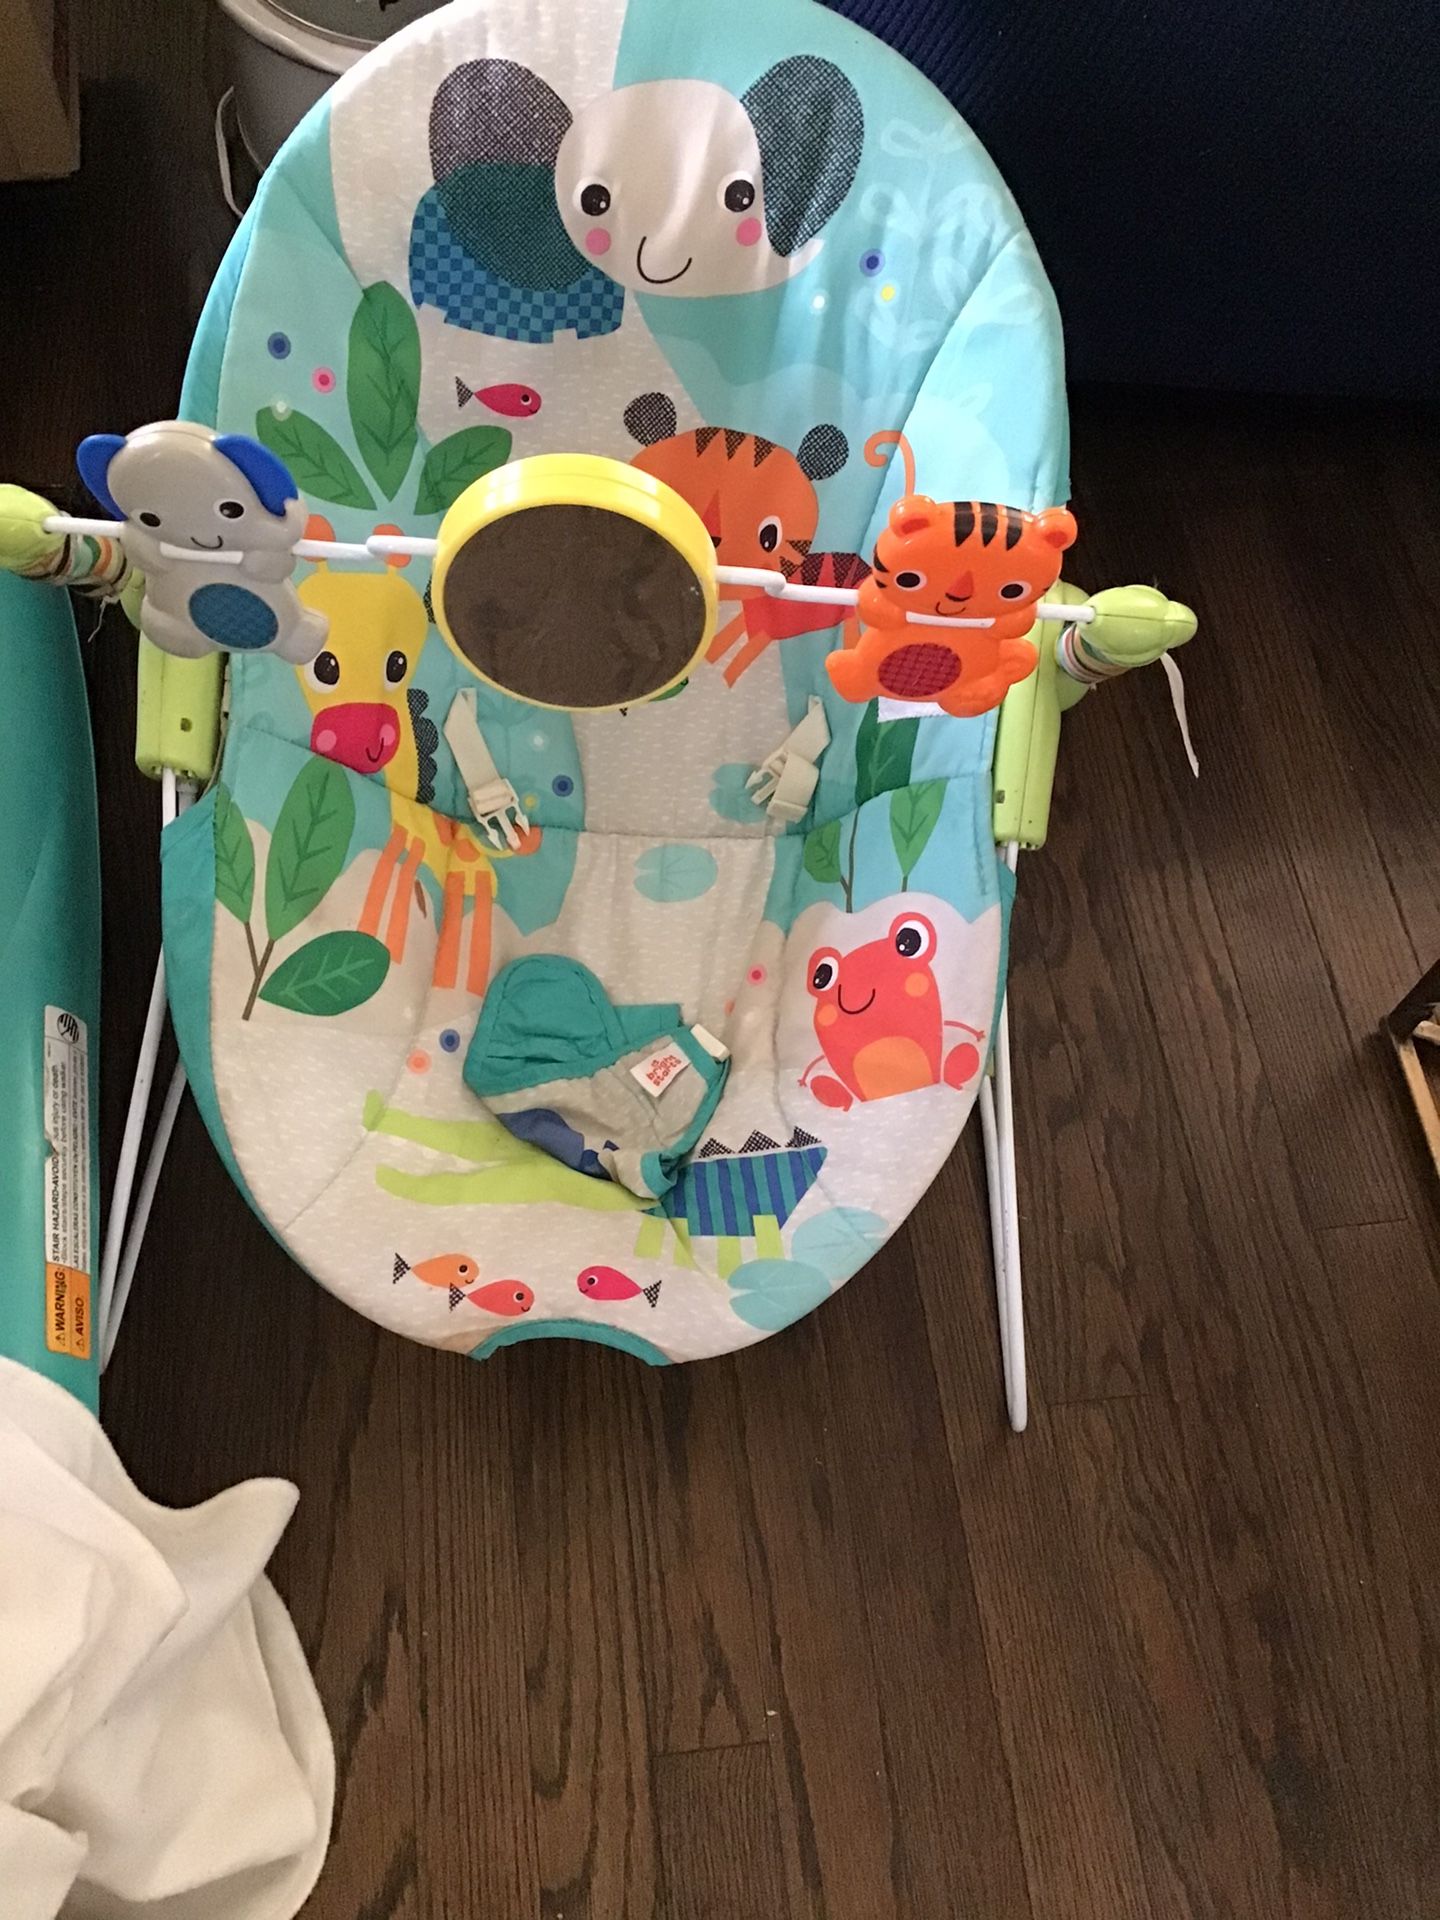 Baby Bouncer Seat